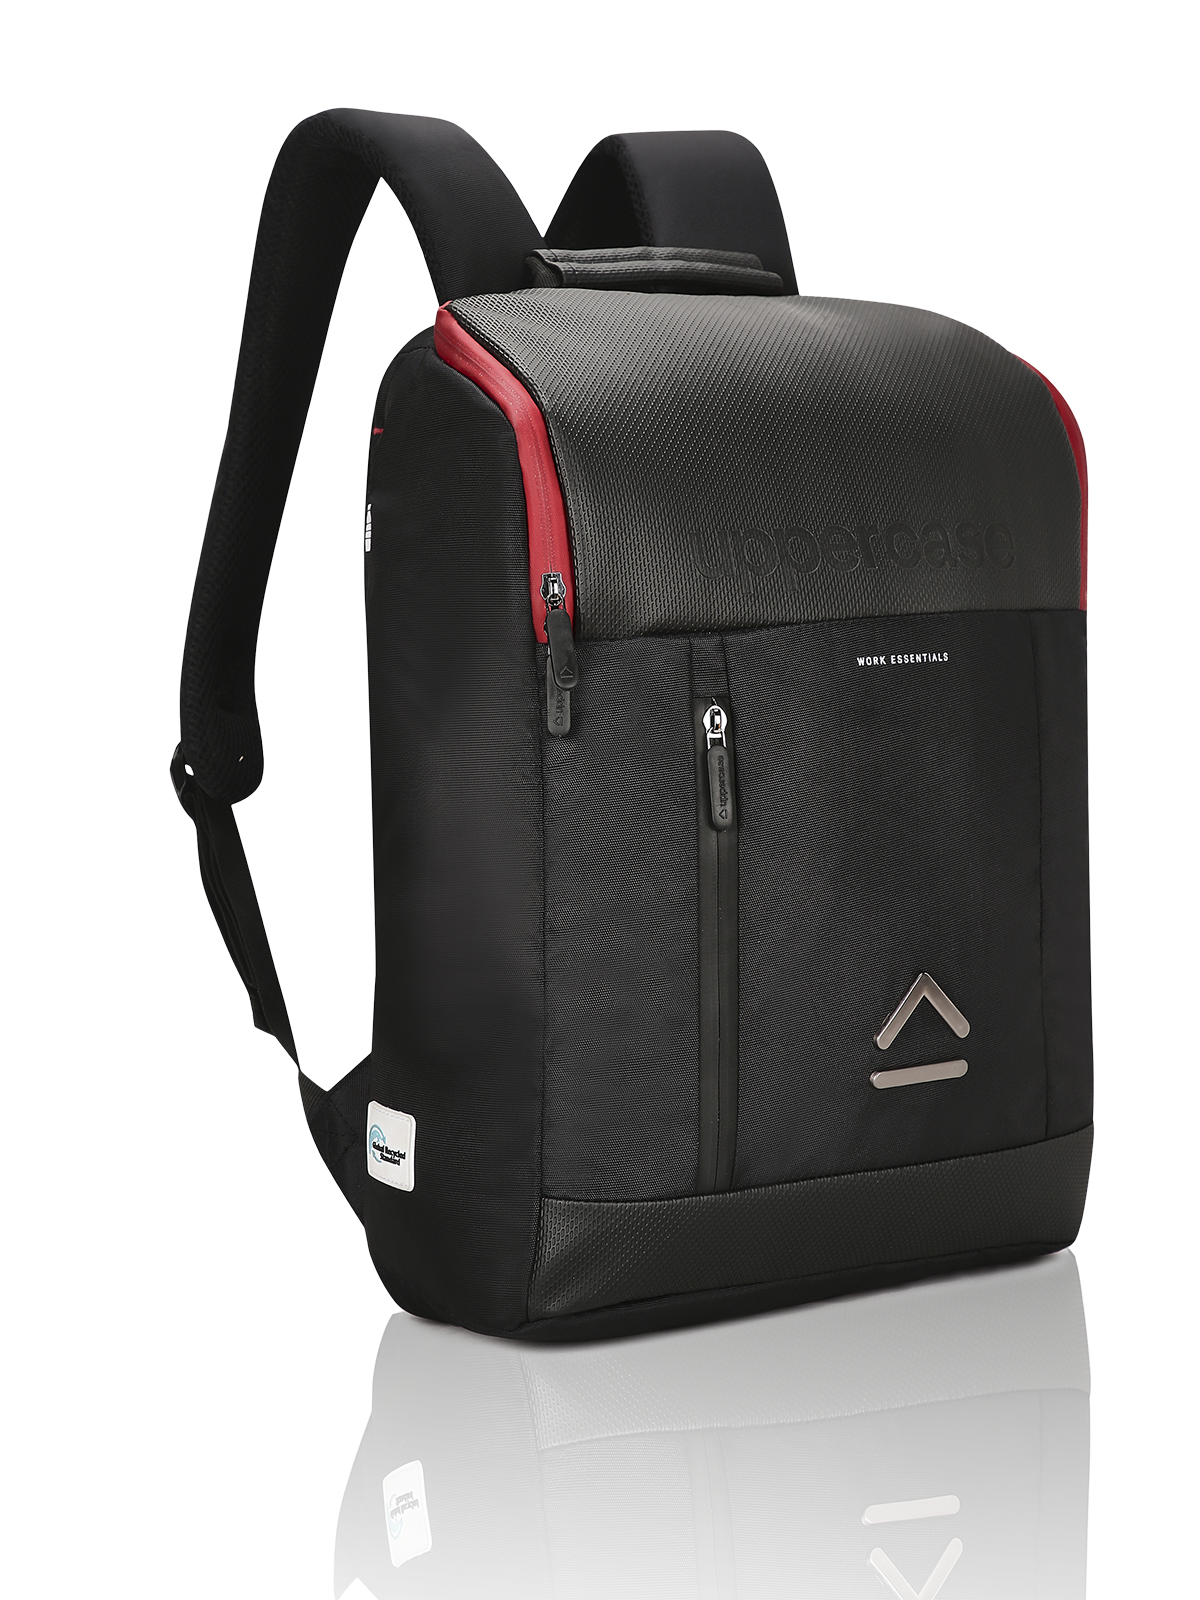 How to Choose a Professional Backpack for the Office | Knack